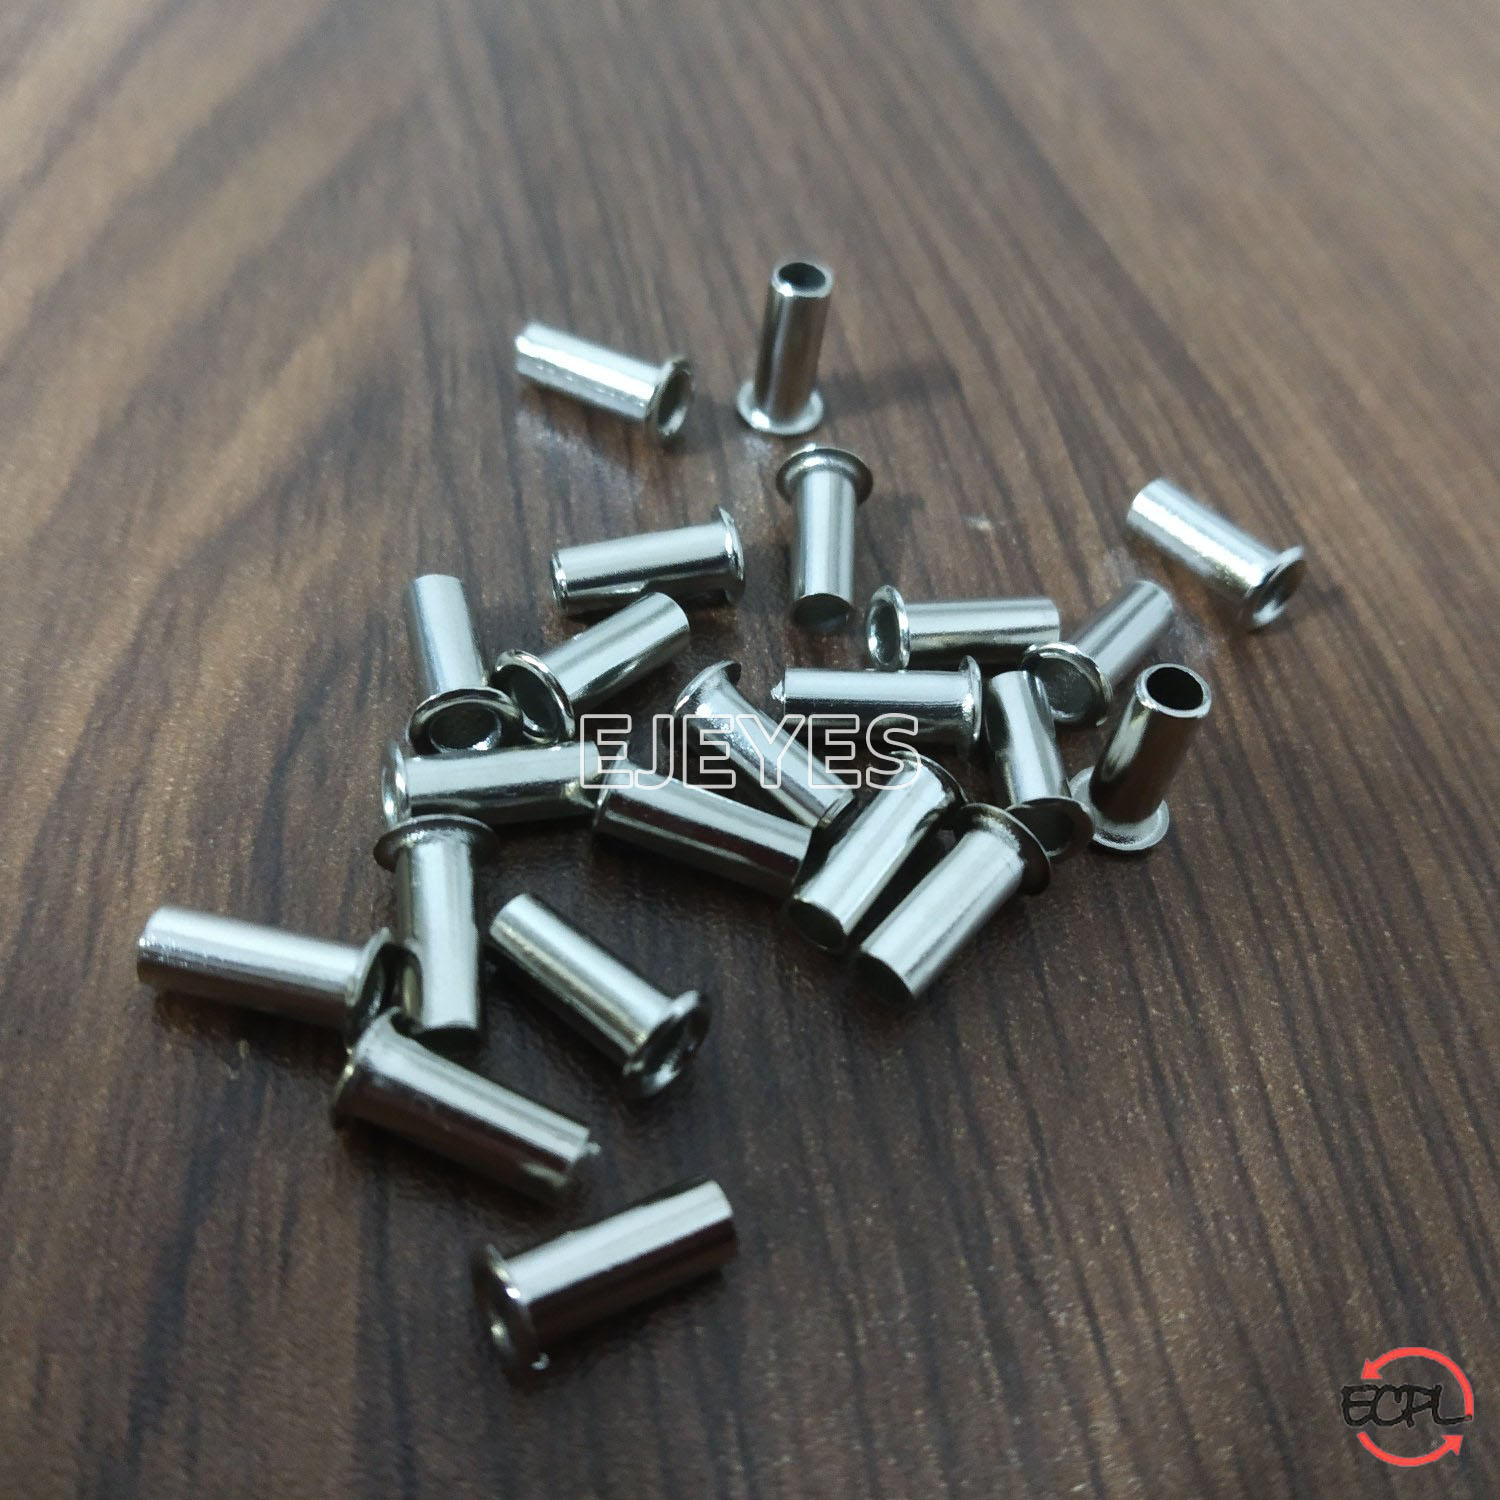 Nickel-plated brass tubular rivet 3080: A dependable and versatile hardware component, perfect for various assembly tasks.